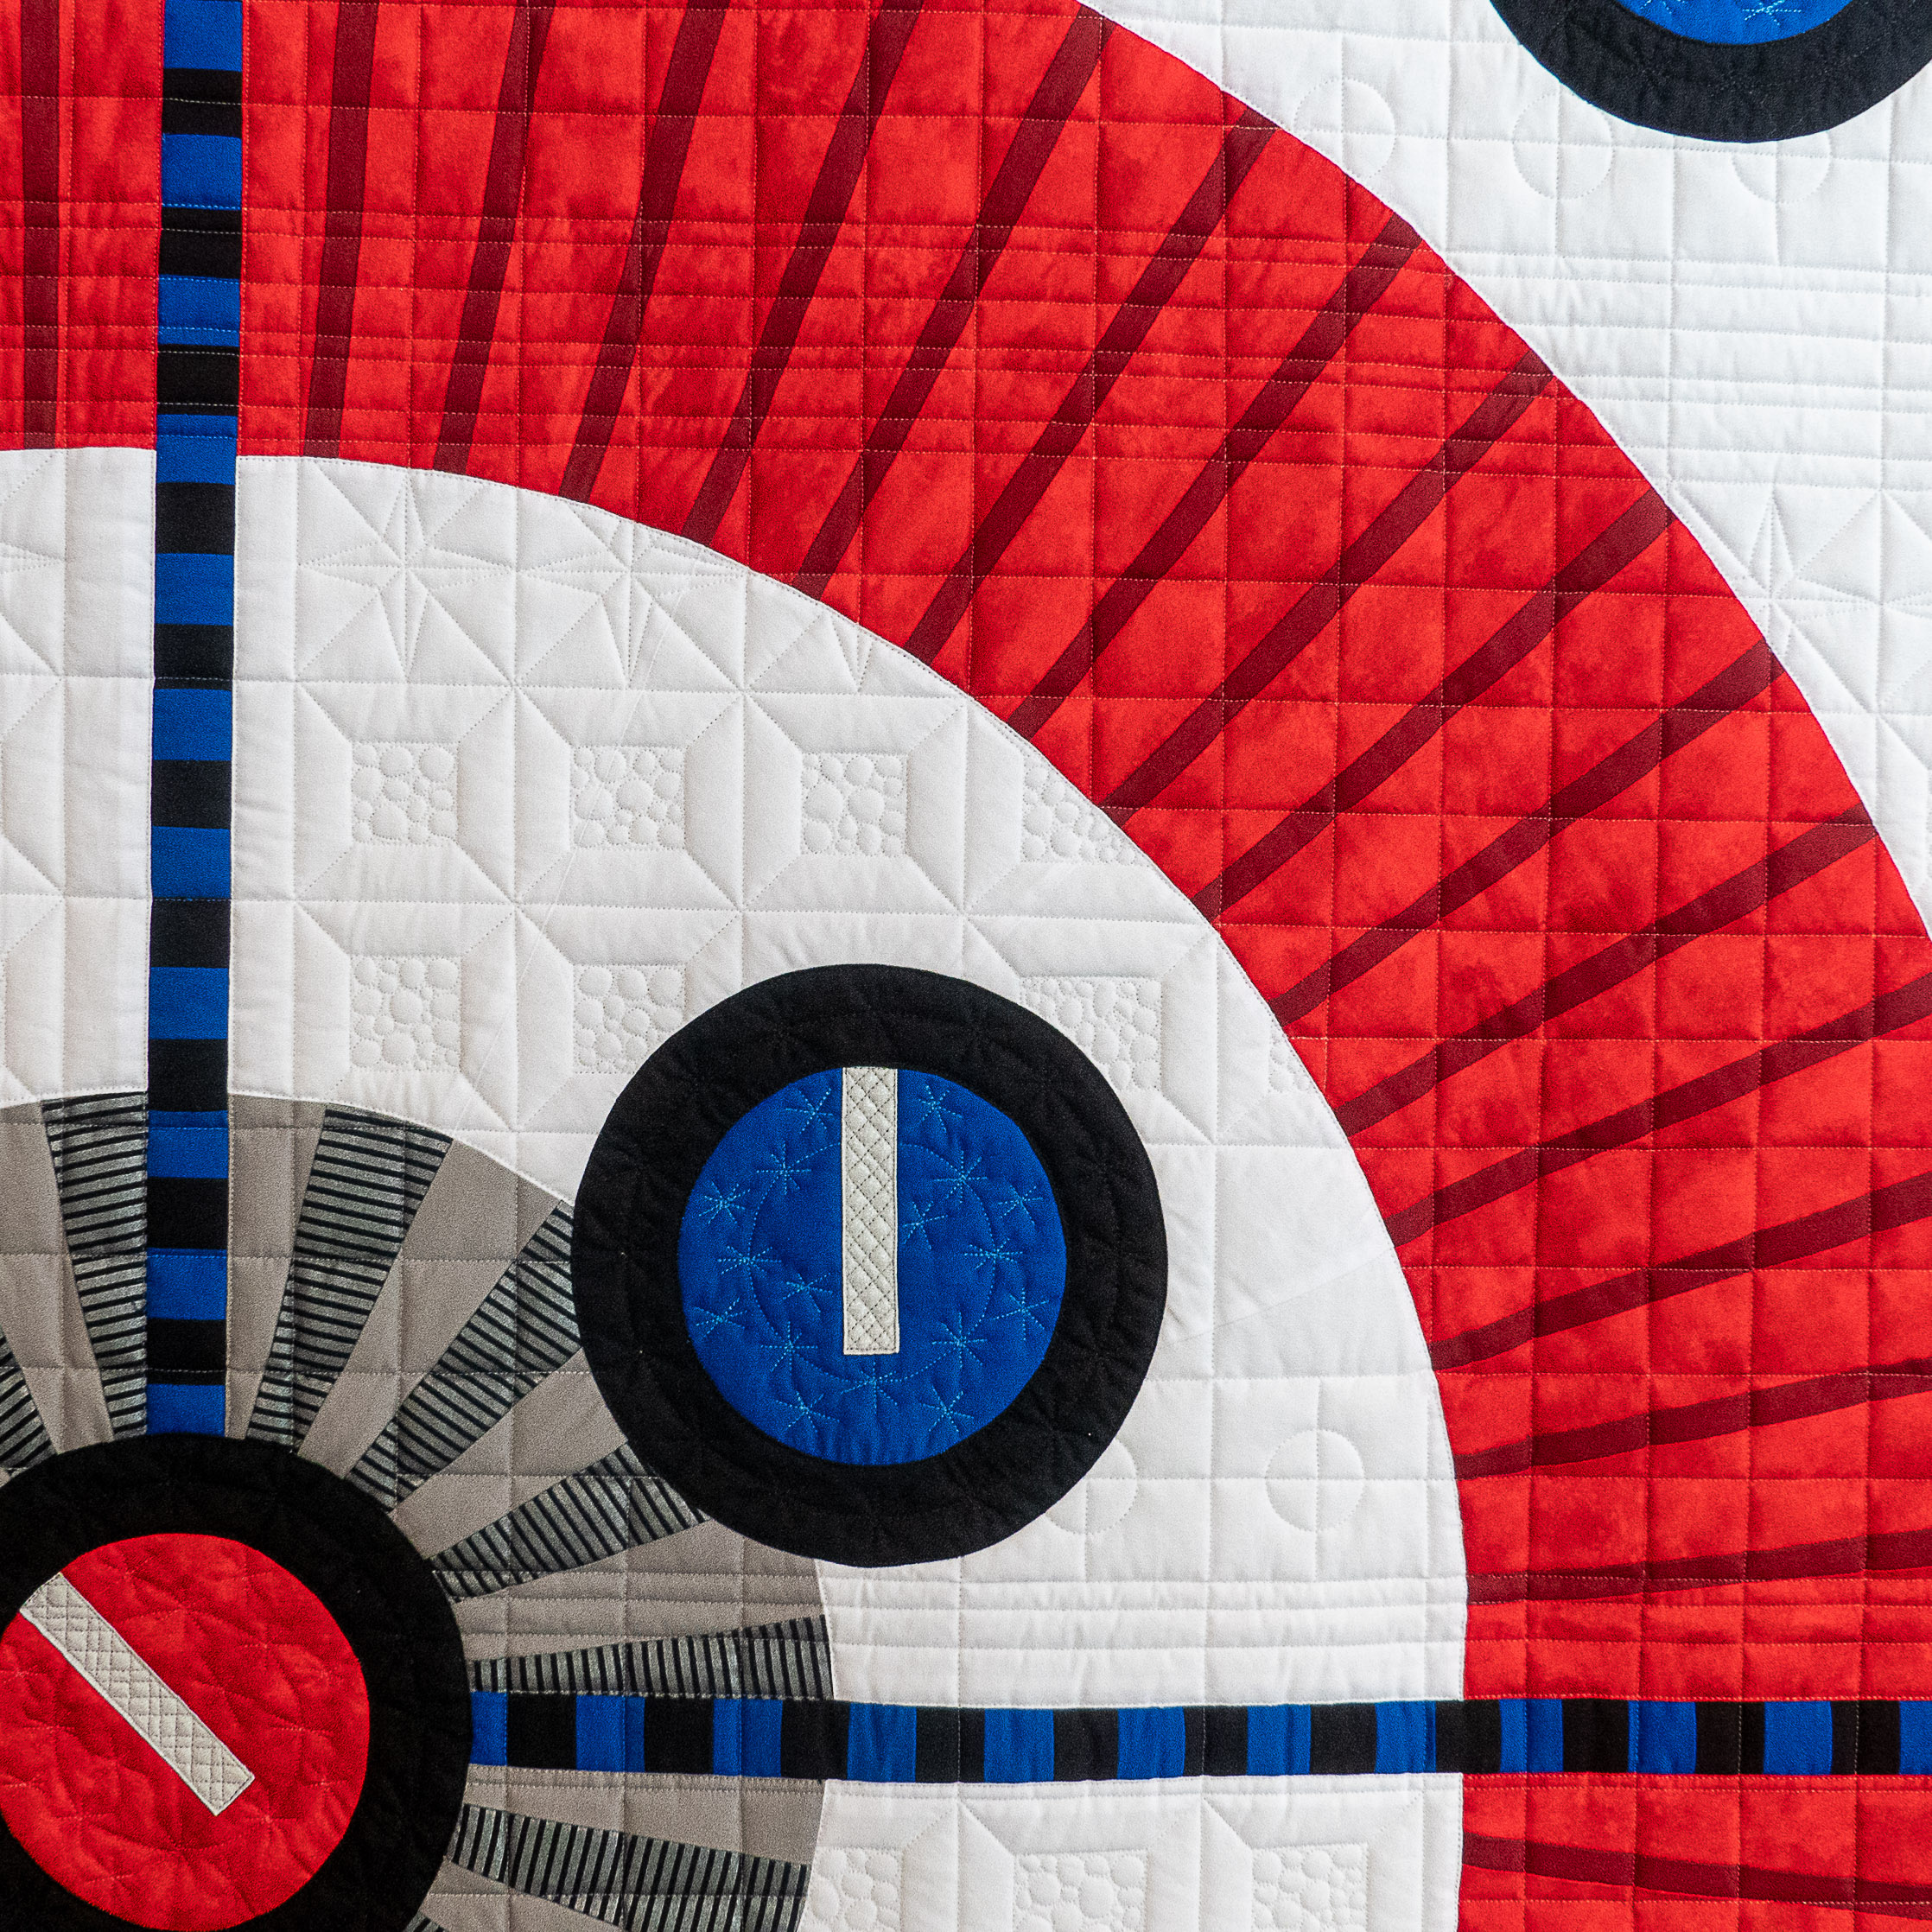 detail of a modern geometric quilt in black, red, blue and black